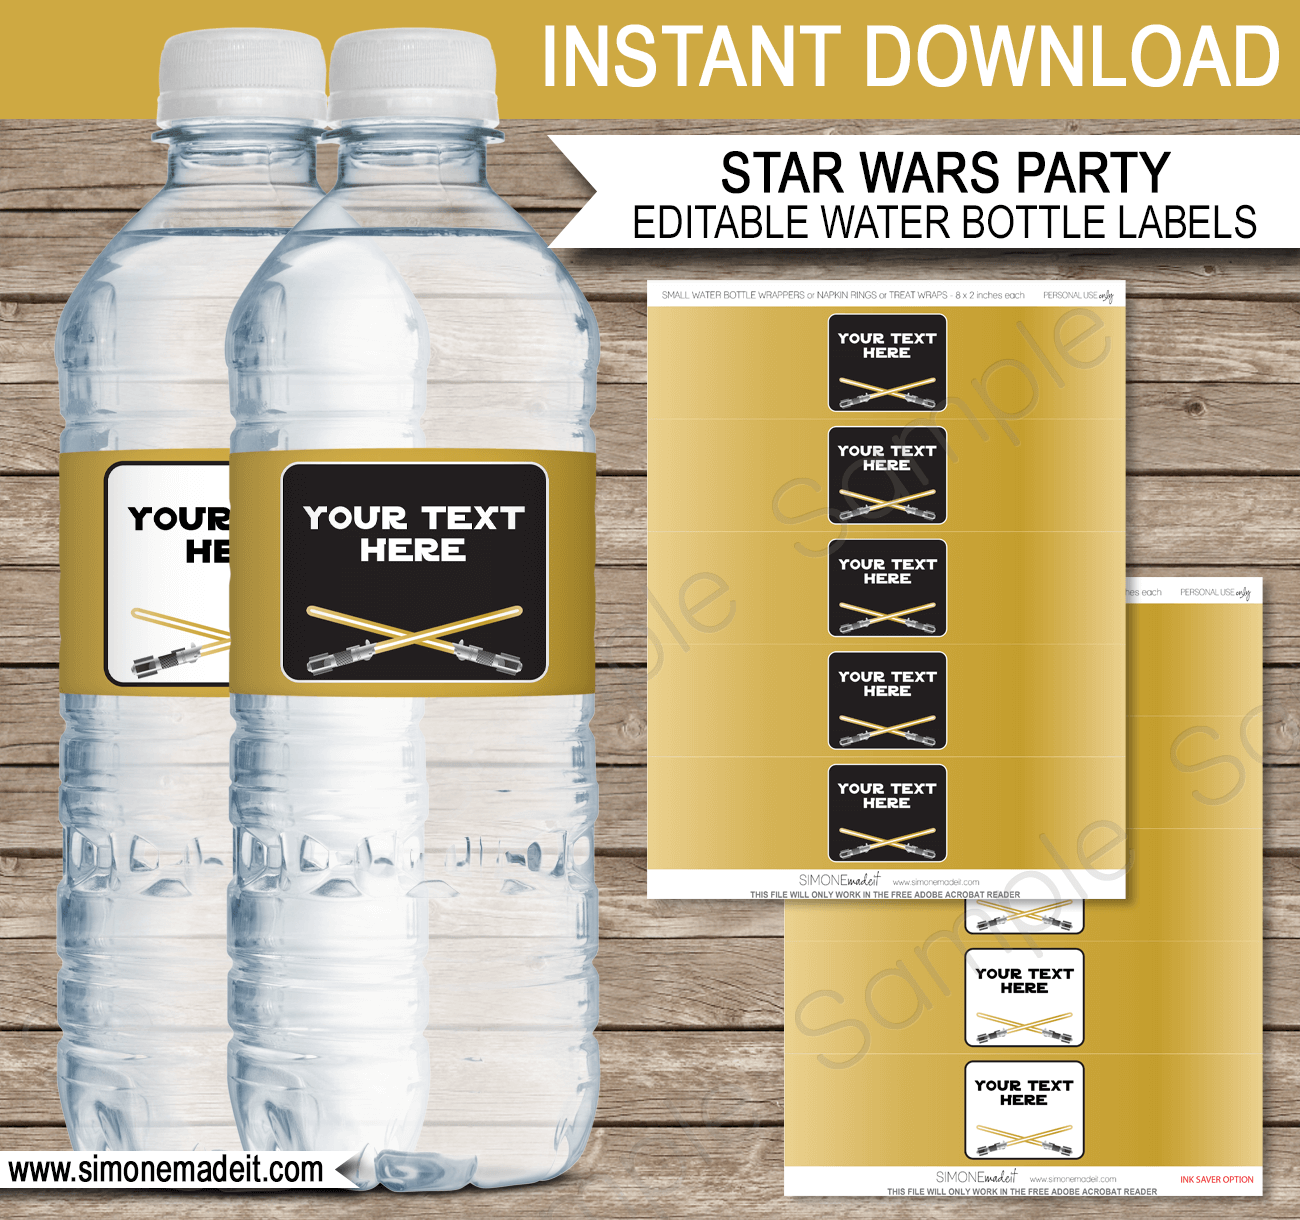 Printable Gold Star Wars Water Bottle Labels Template | Birthday Party Decorations | DIY Editable Text | $3.00 INSTANT DOWNLOAD via SIMONEmadeit.com